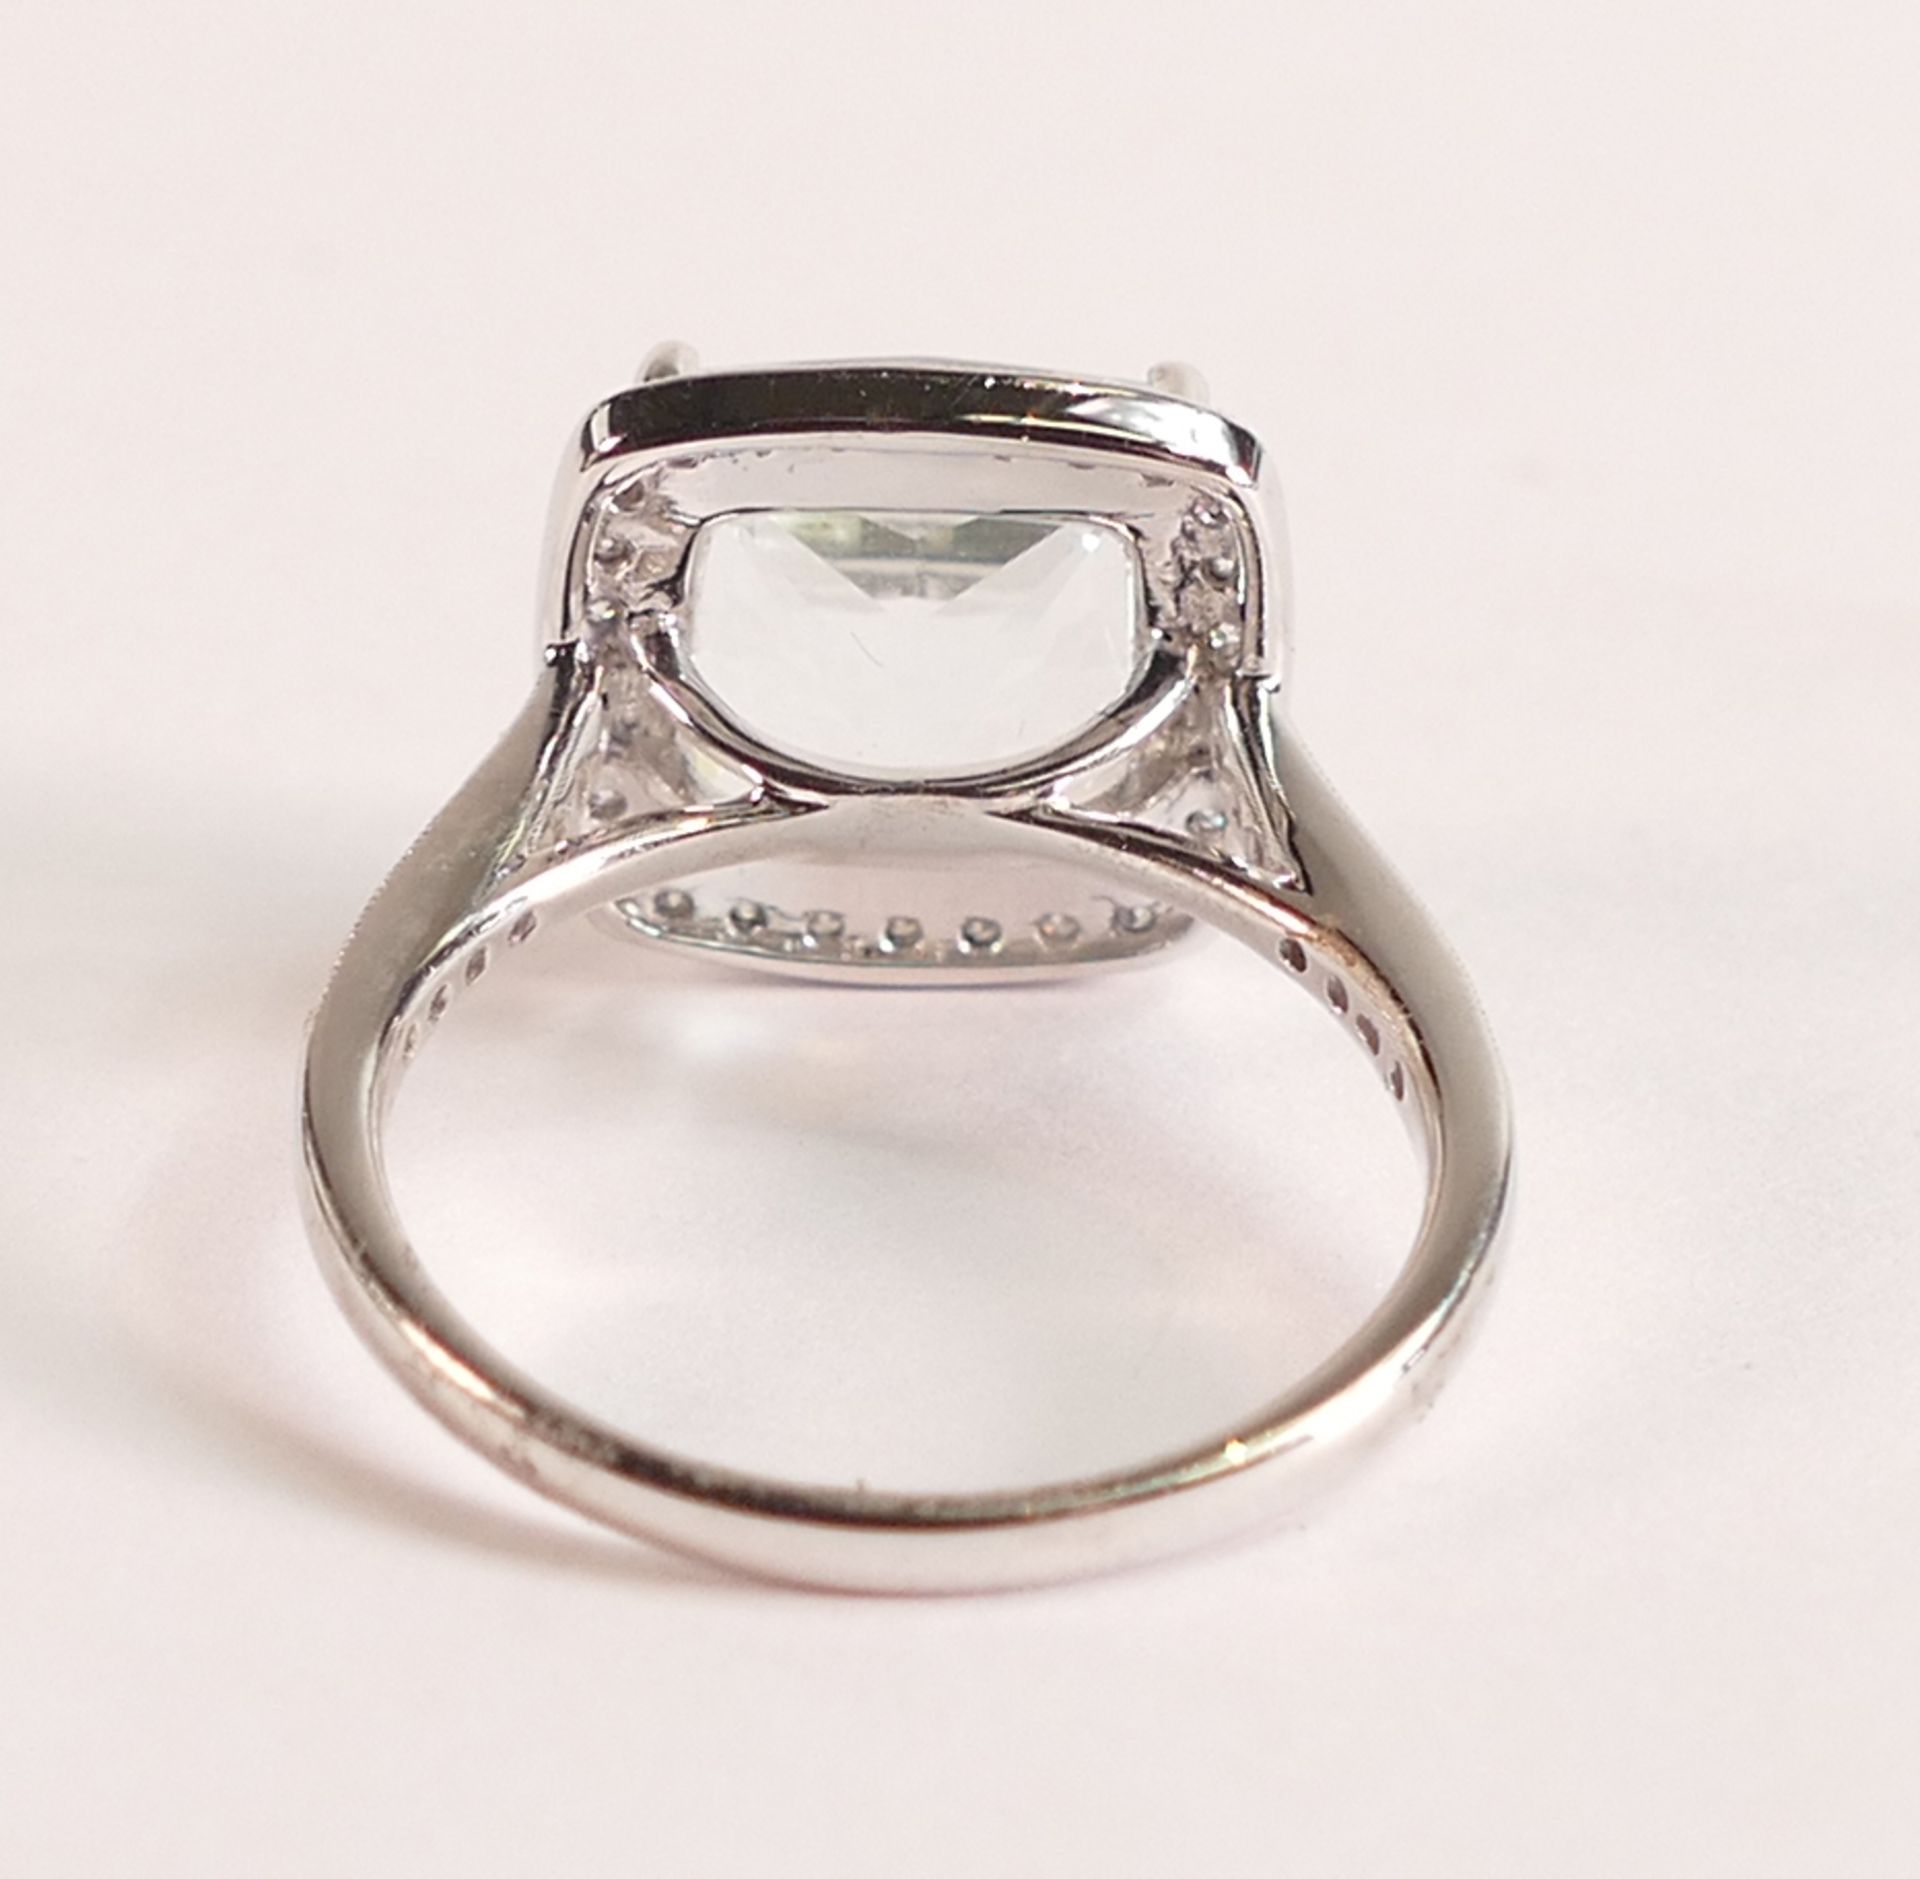 Platinum Ring With Clear Crystal Quartz and Diamonds - Crystal quartz measures 10.48mm by 10.48mm - Image 3 of 3